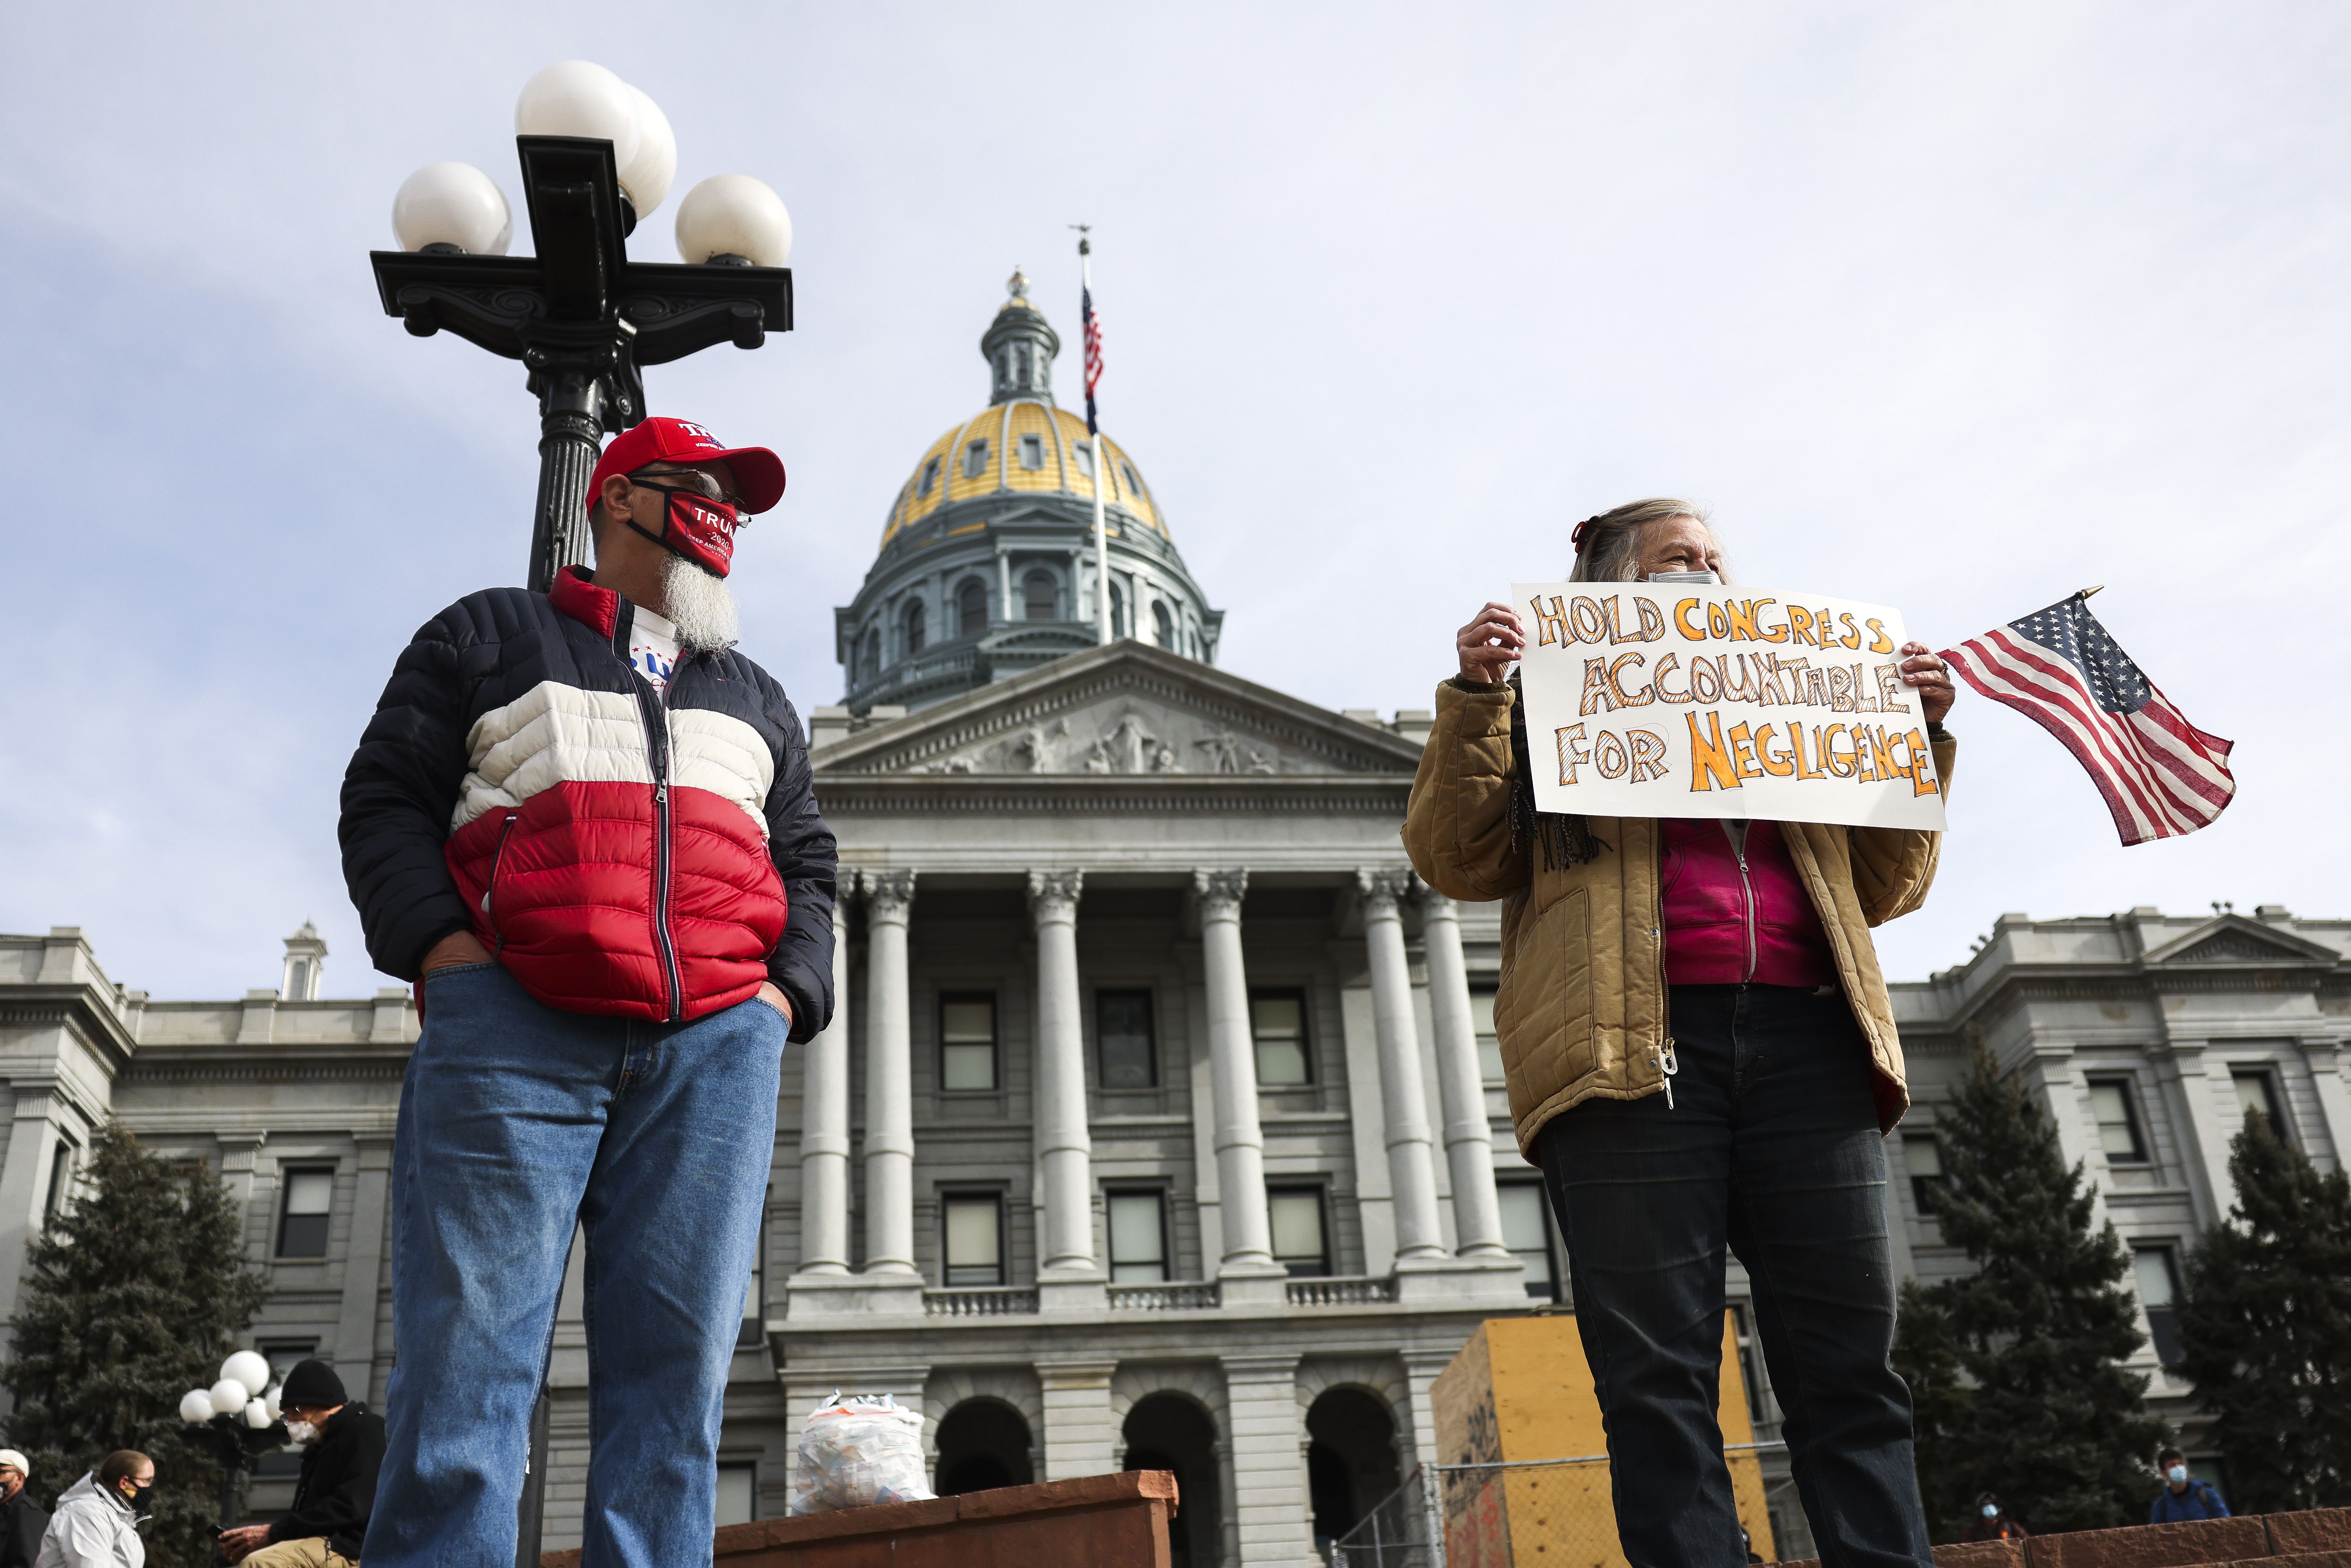 A few people protest the results of the election outside the Colorado State Capitol on January 17